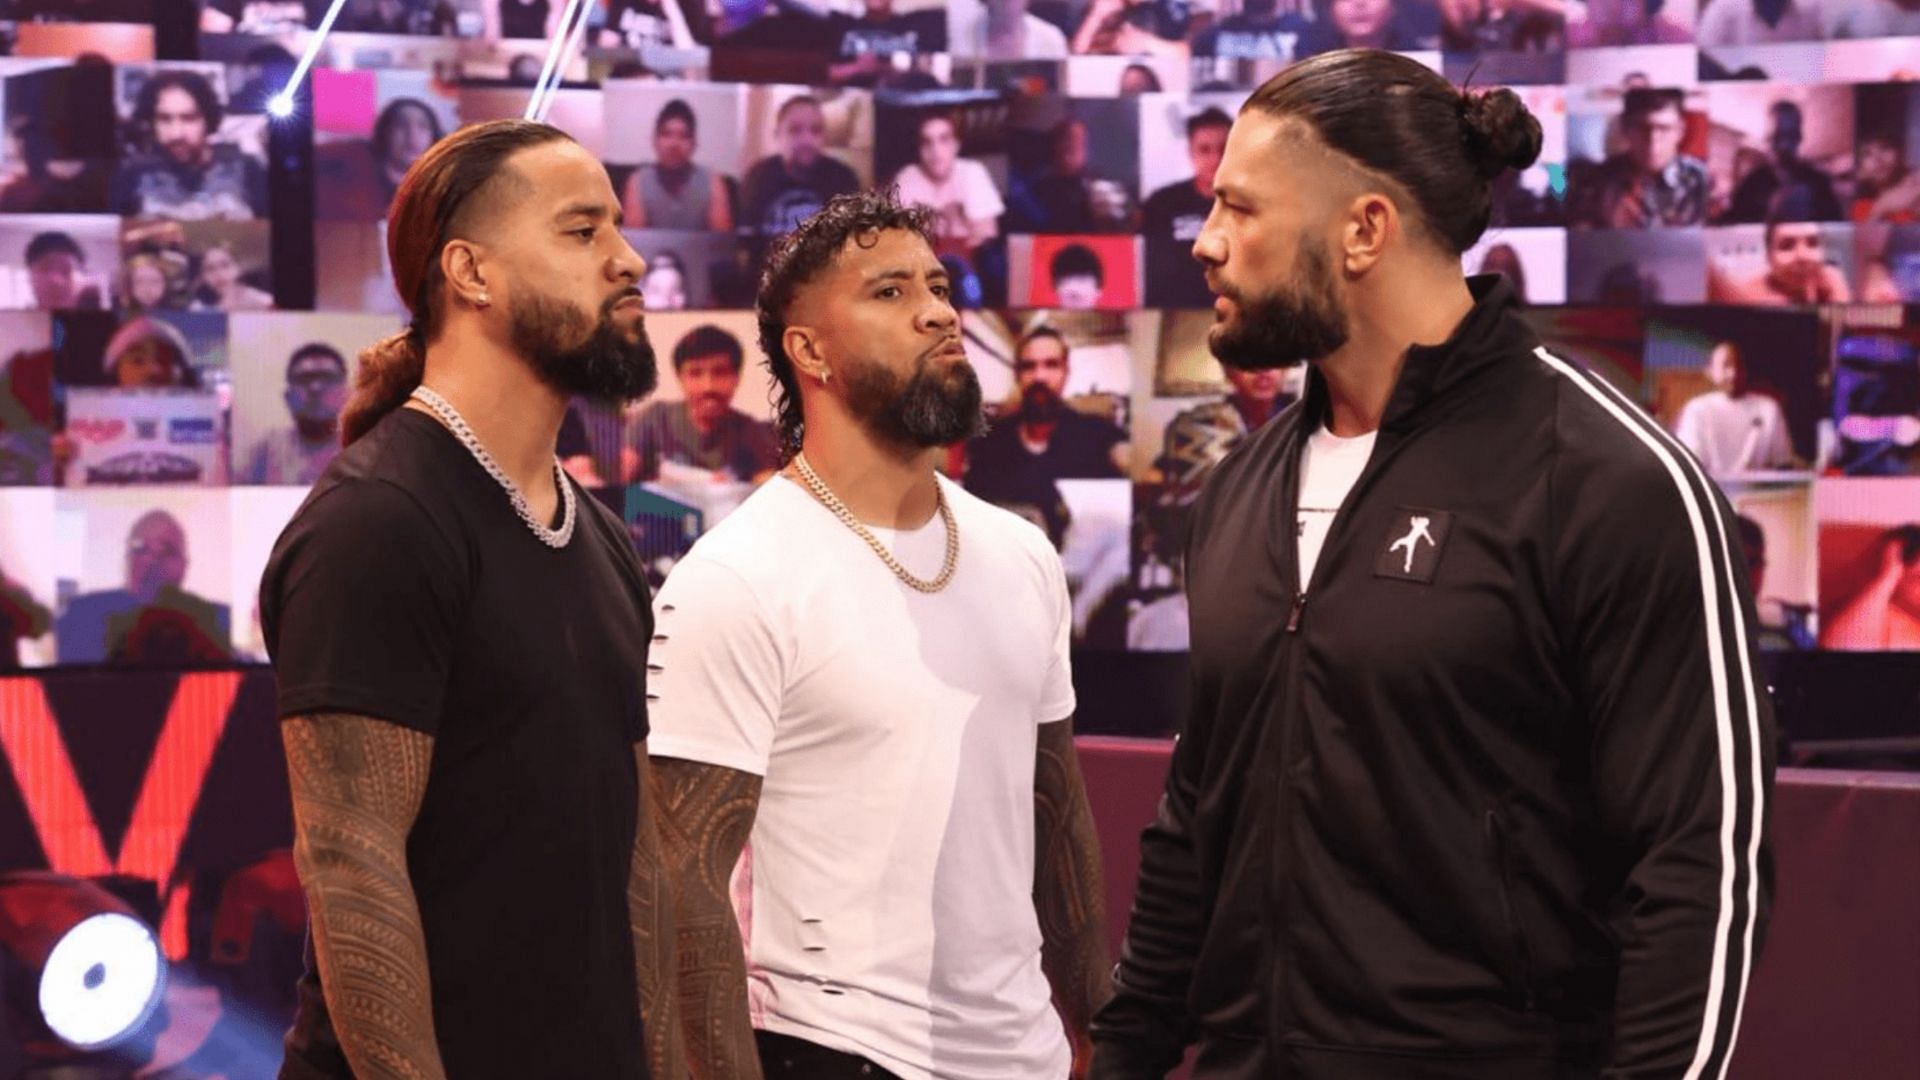 Undisputed WWE Universal Champion Roman Reigns is currently feuding with The Usos